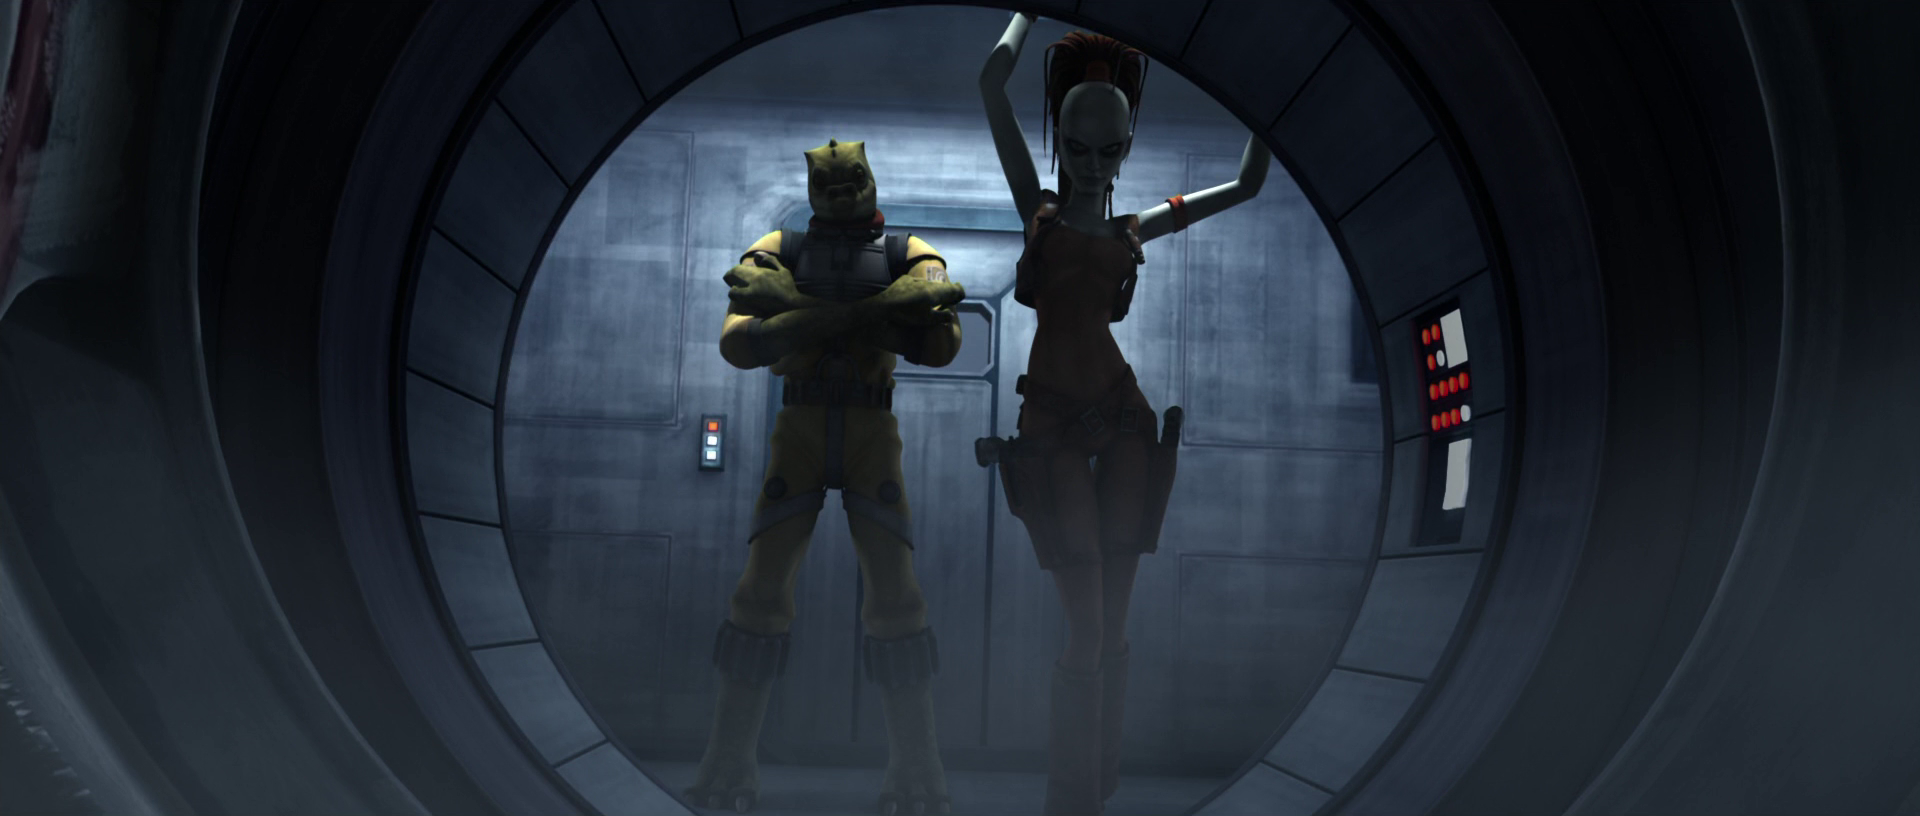 https://vignette.wikia.nocookie.net/starwars/images/8/82/Slave_I_airlock.png/revision/latest?cb=20120913232218